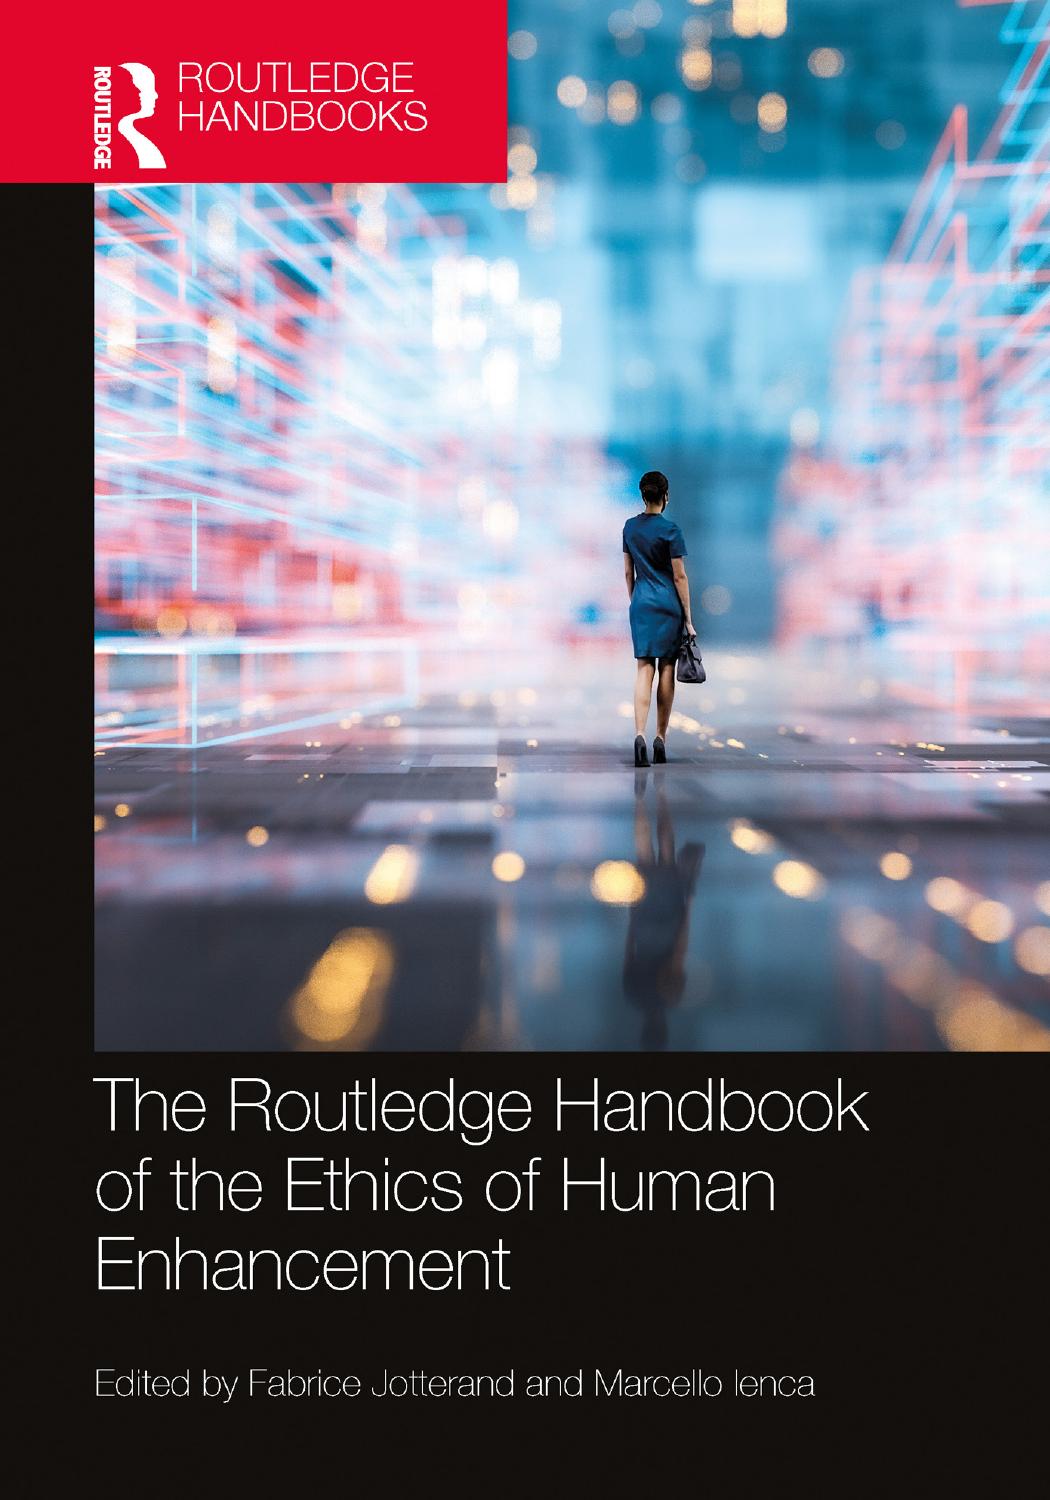 The Routledge Handbook of the Ethics of Human Enhancement